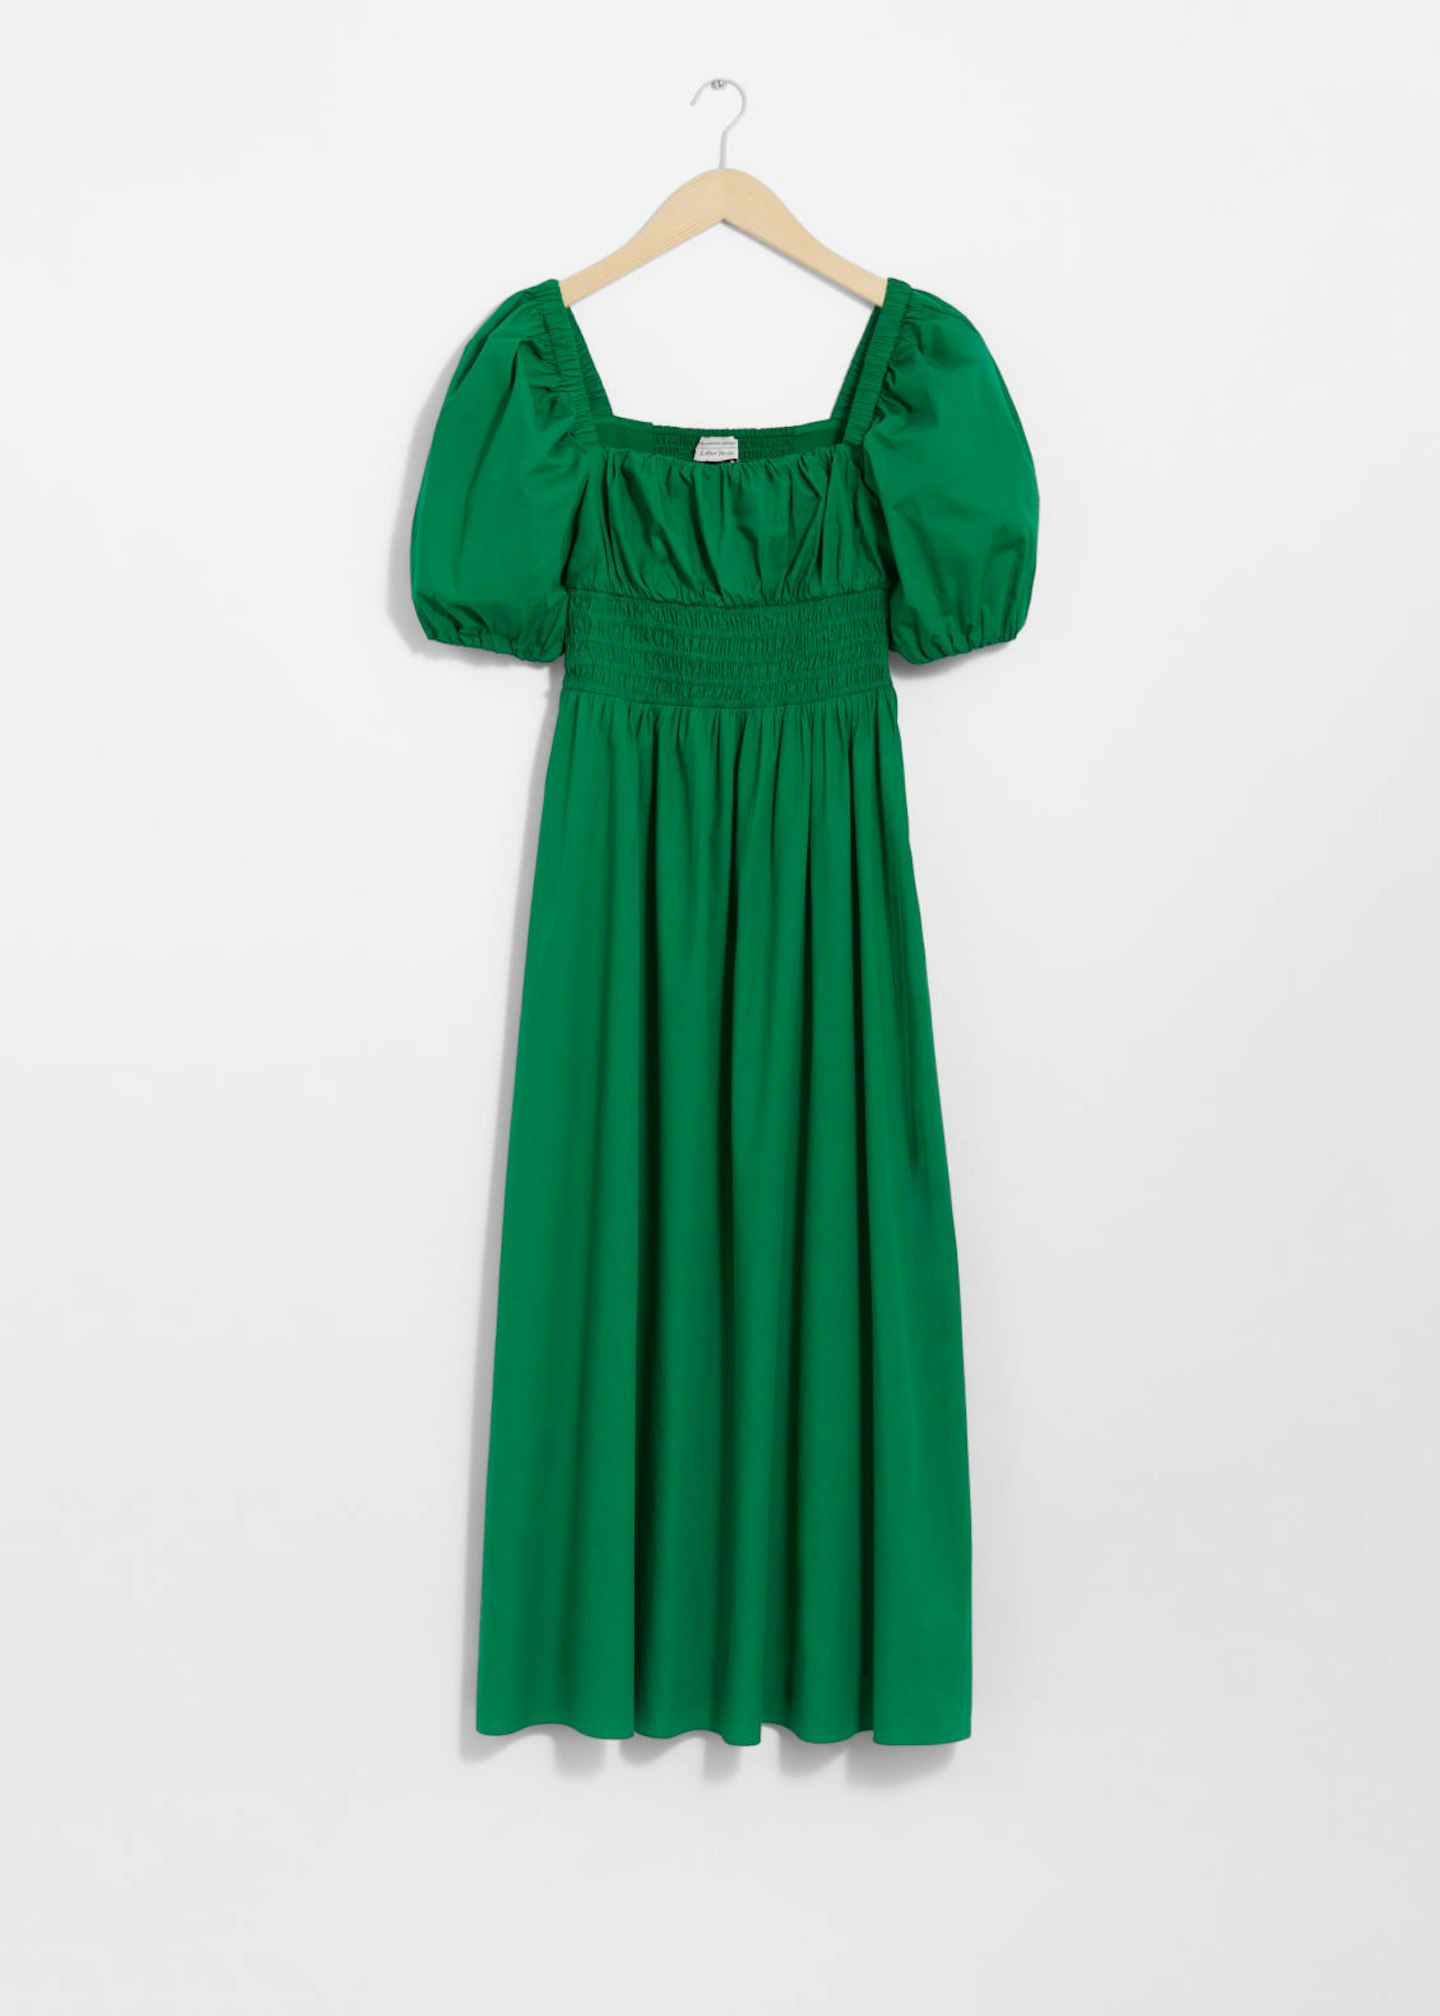 & Other Stories, Puff Sleeve Midi Dress